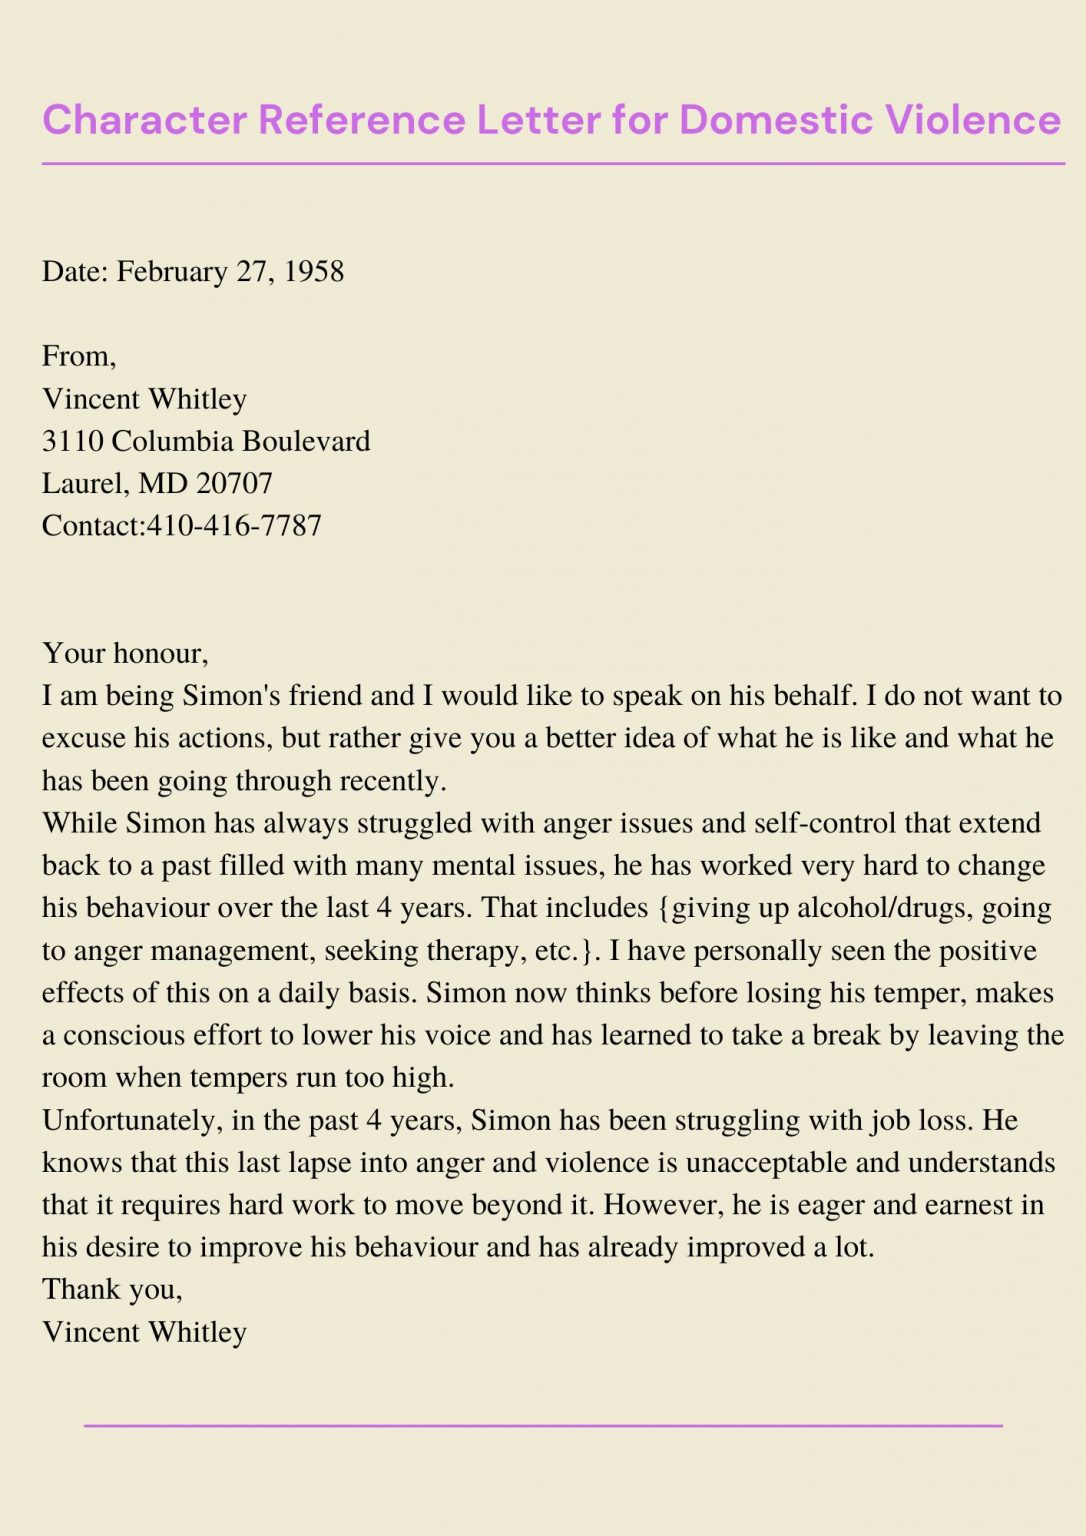 Character Reference Letter for Domestic Violence Template